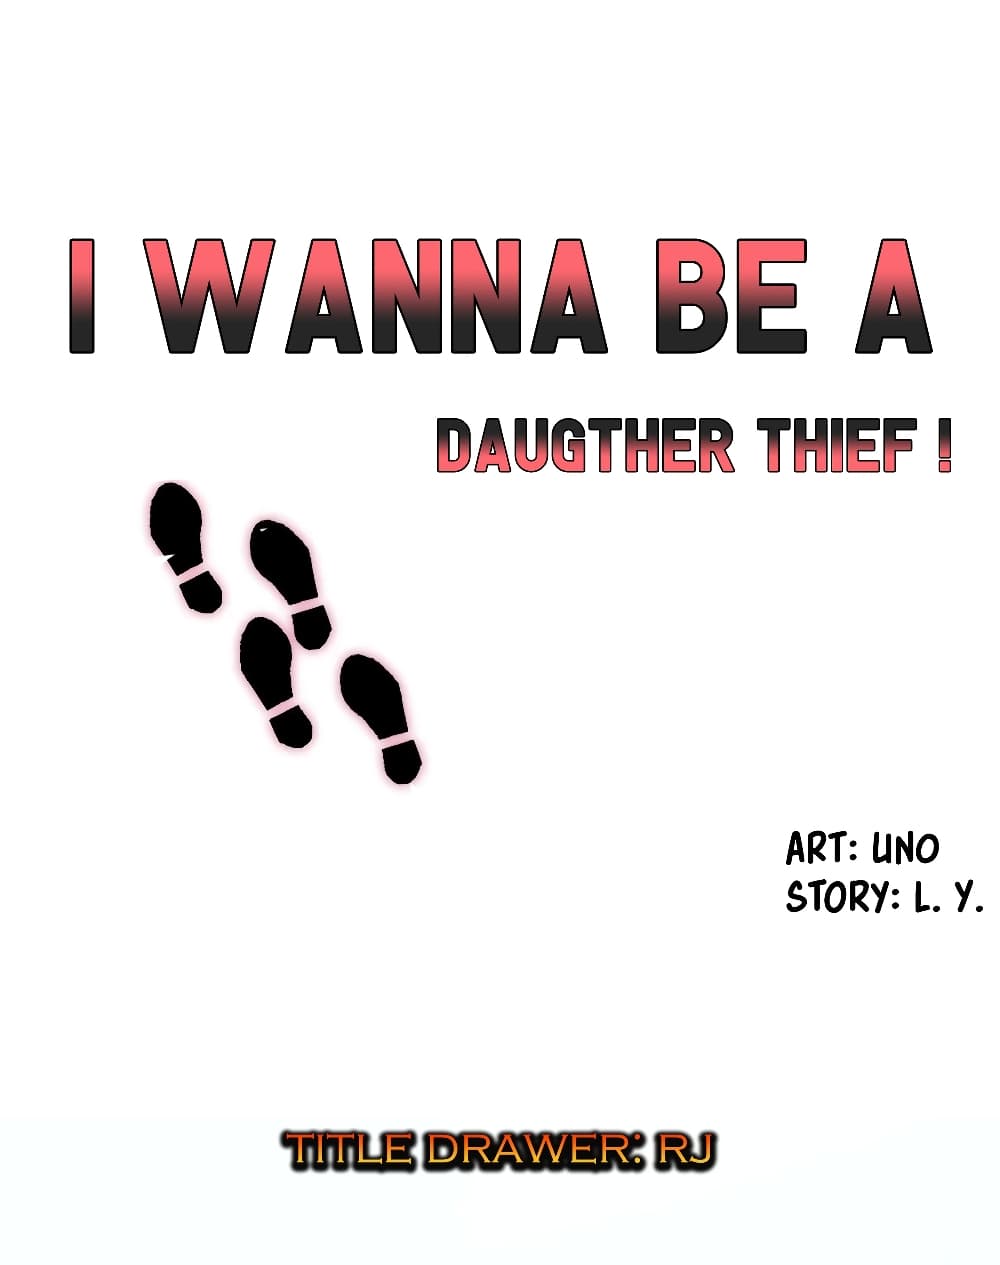 I Wanna Be a Daughter Thief 1 (1)